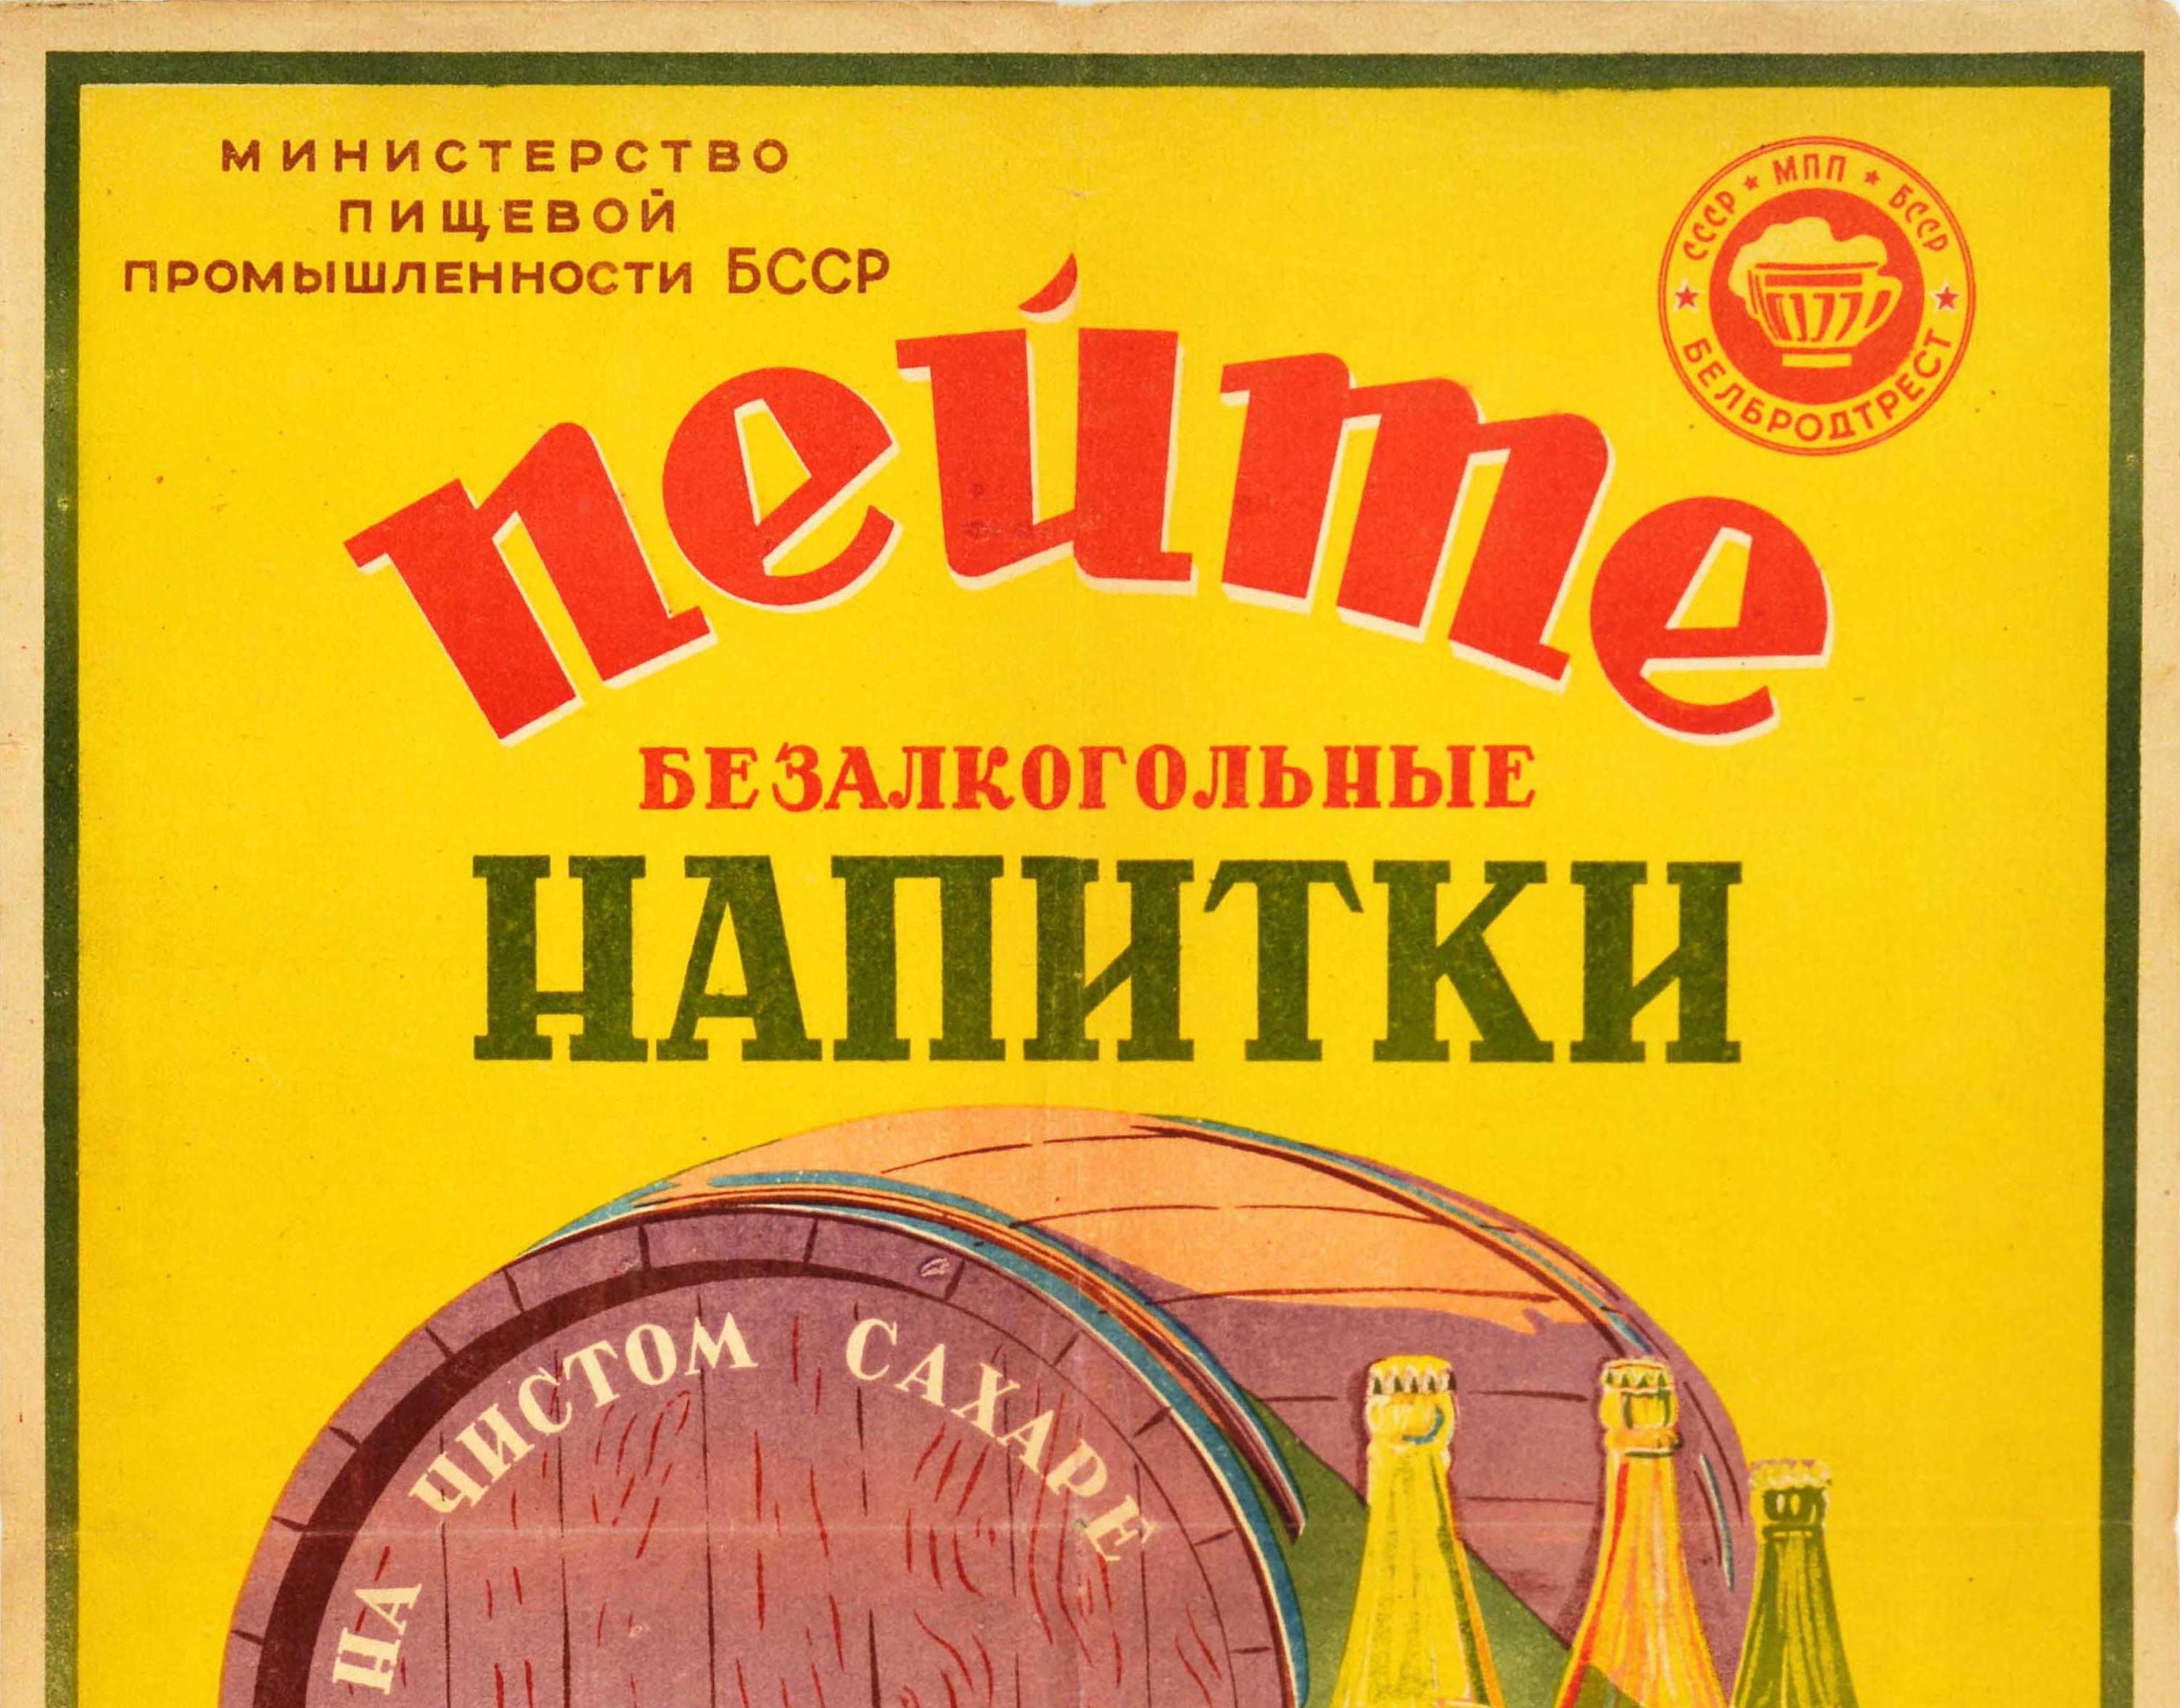 Original Vintage Drink Poster Non Alcoholic Soft Drinks Juice USSR Food Industry - Print by Unknown